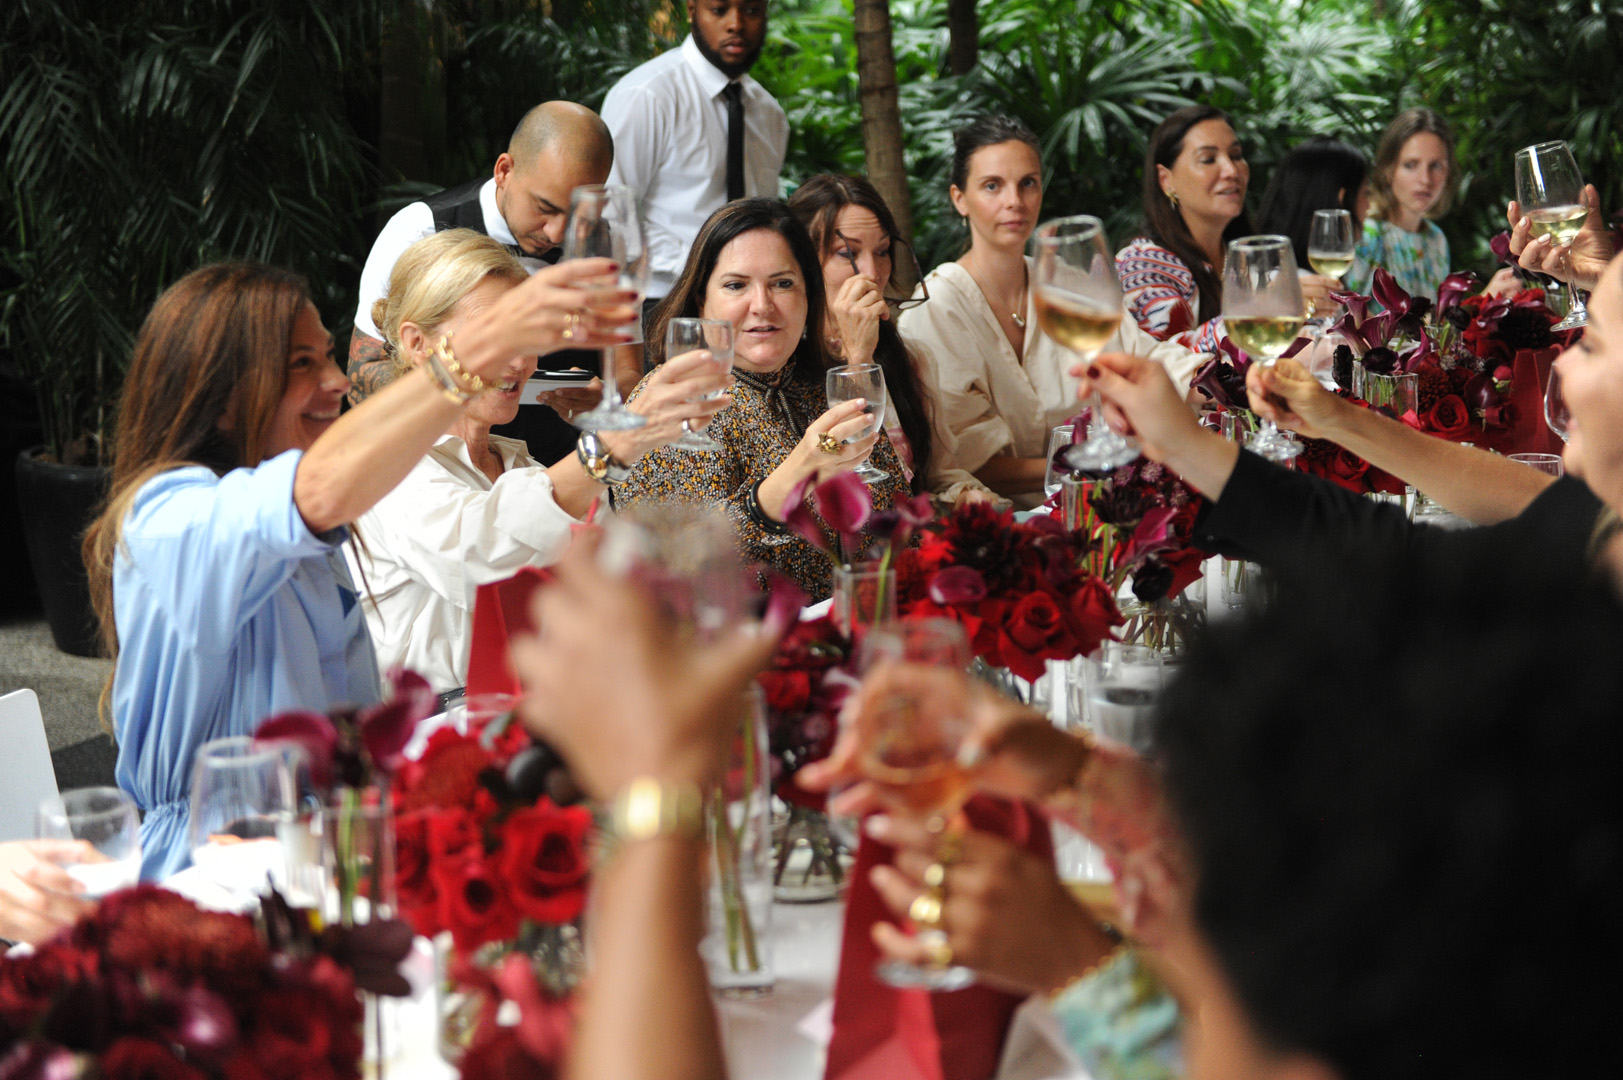 A table of woman hold up wine glasses for a toast